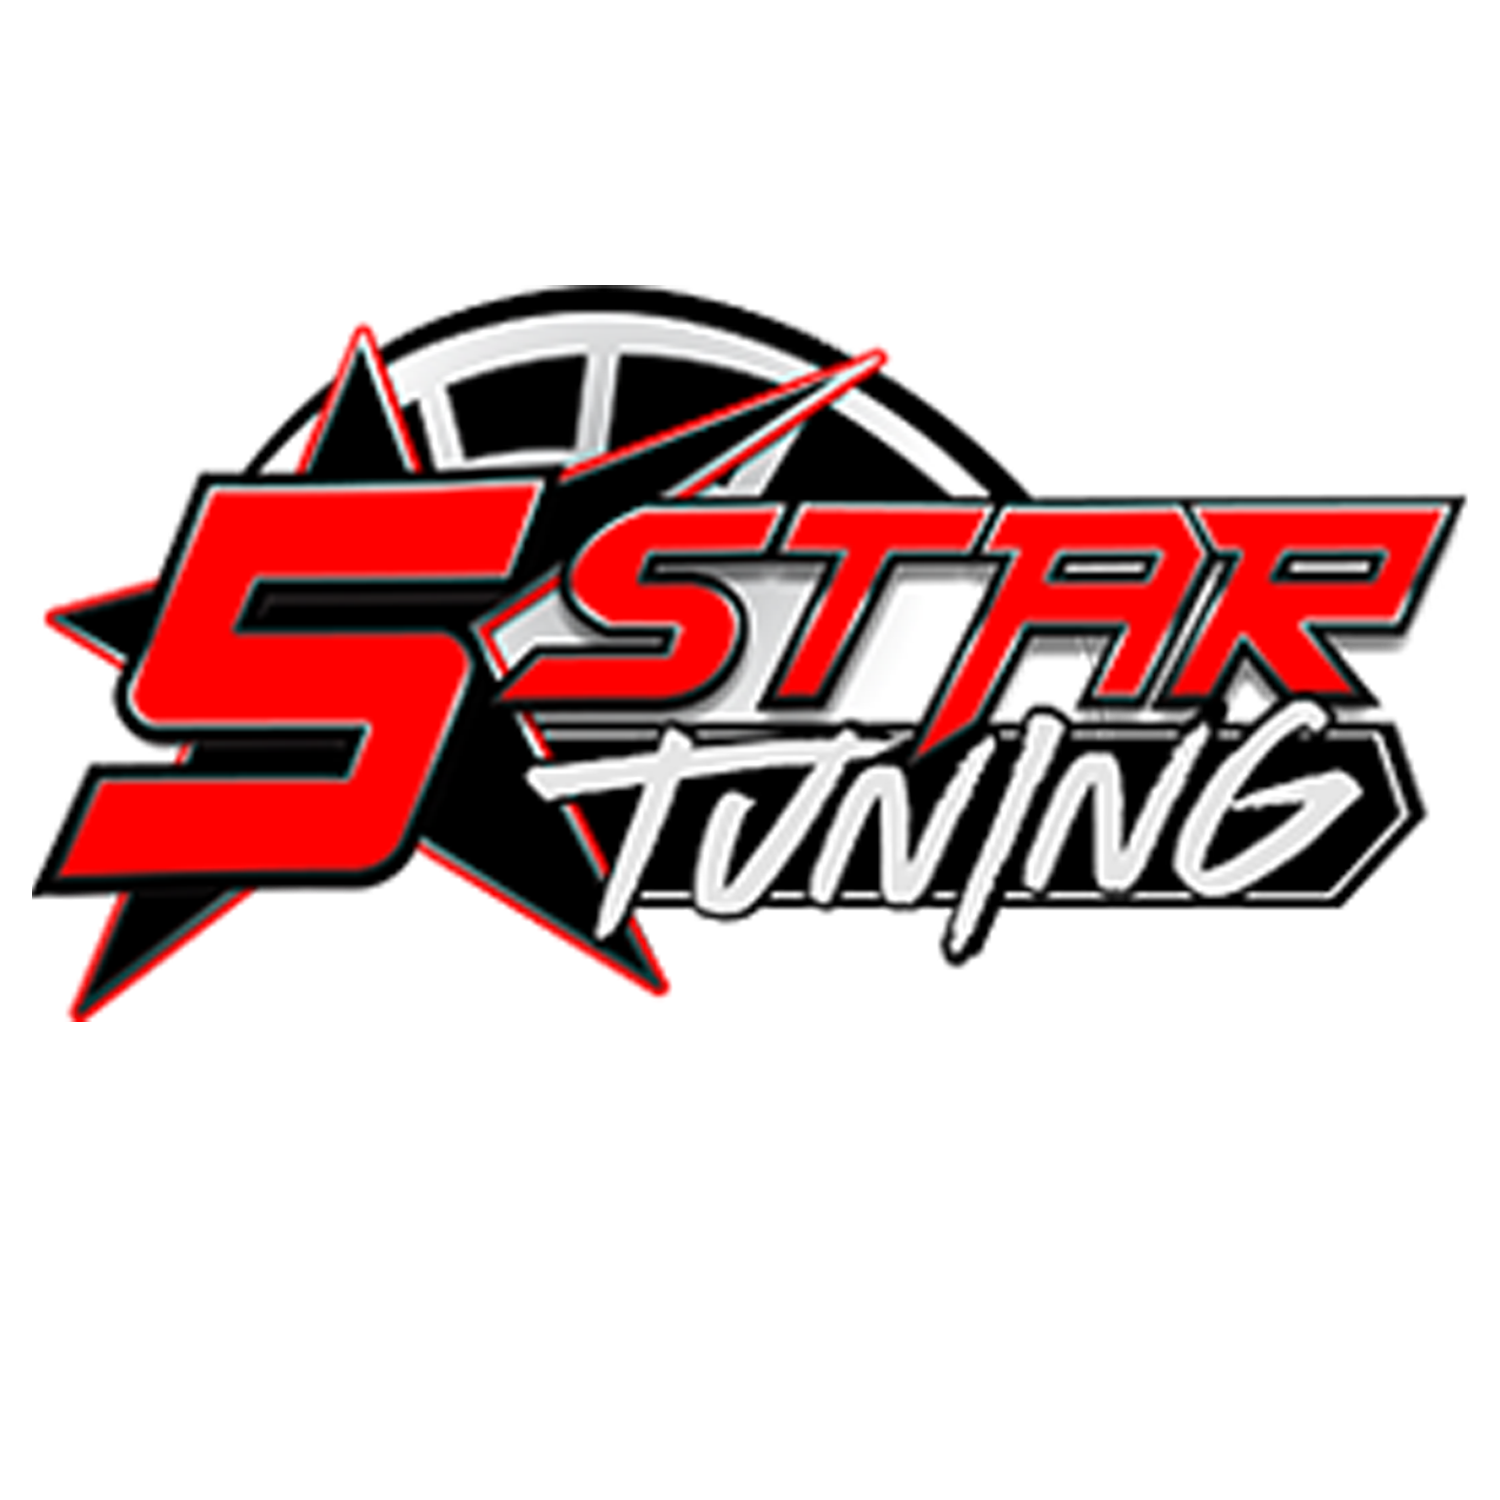 5 Star Tuning - Florence, SC 29501 - (843)536-1244 | ShowMeLocal.com